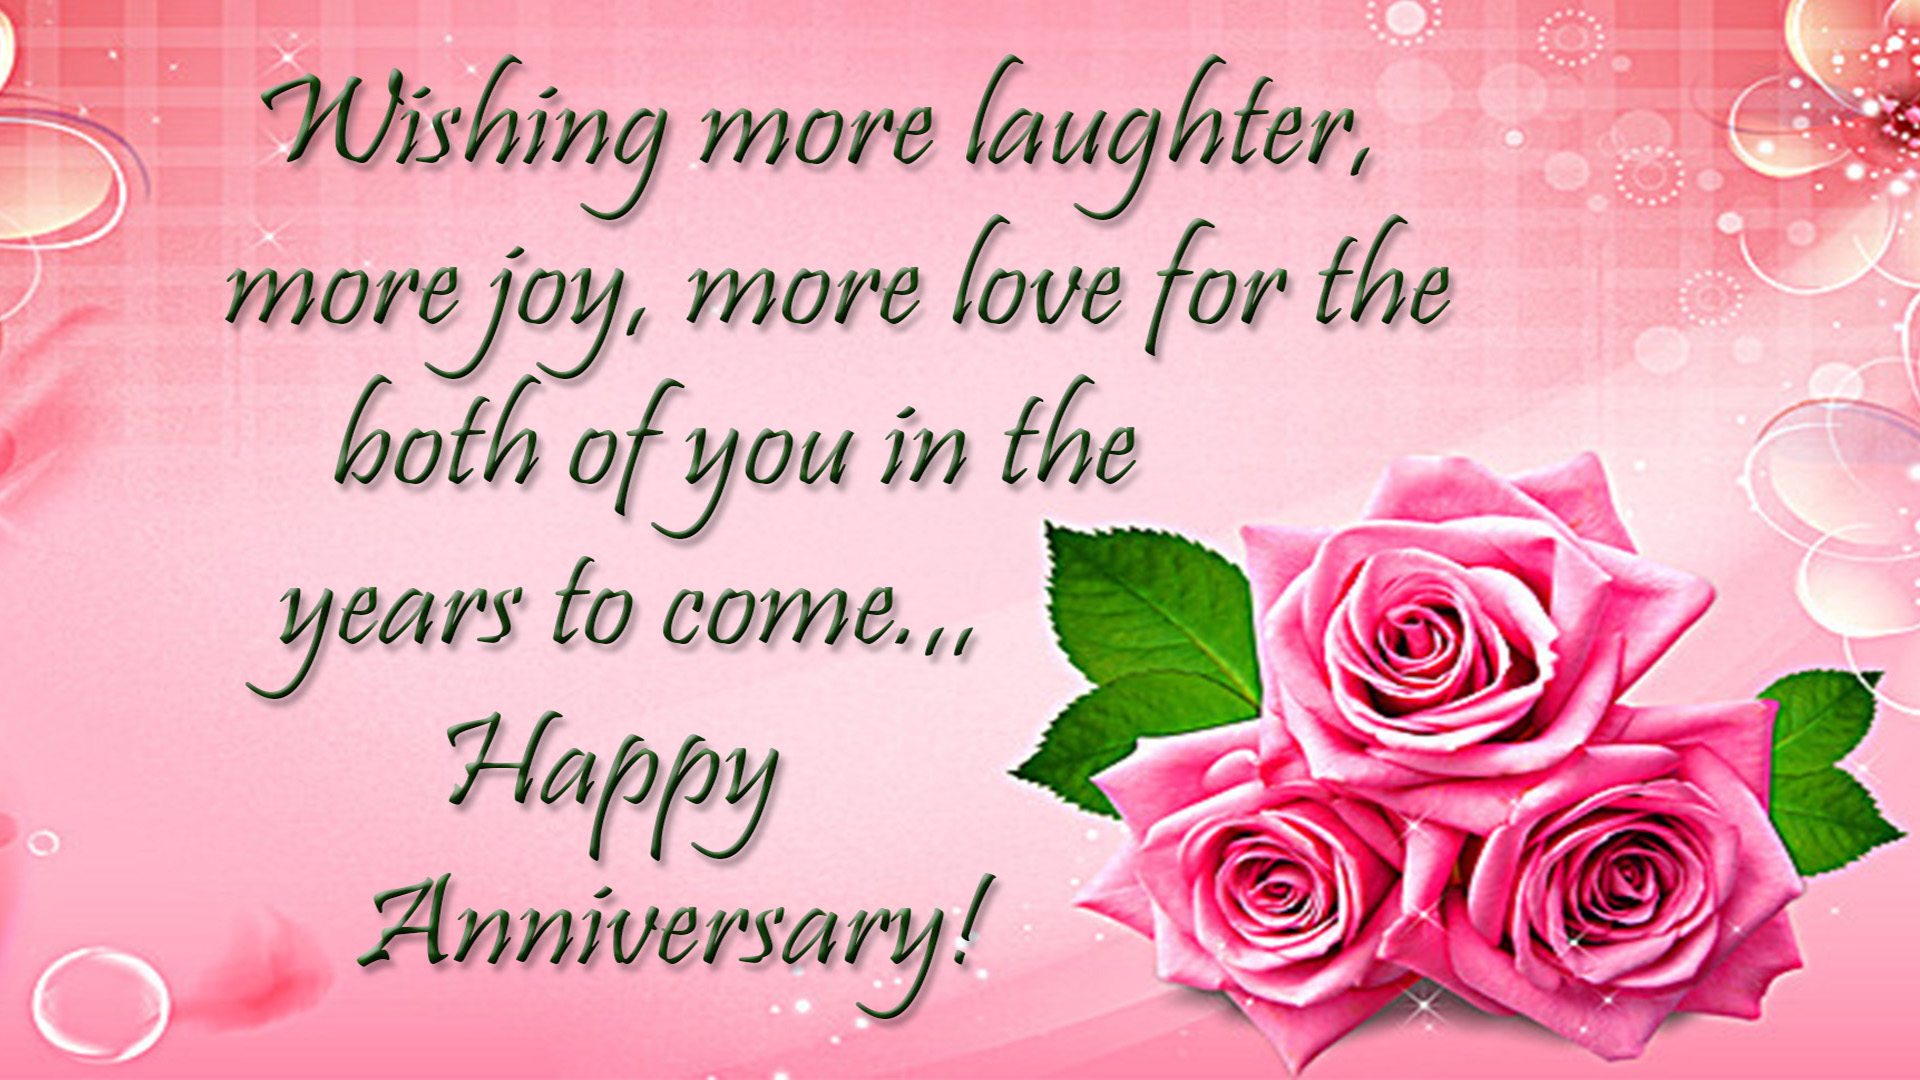 Happy Anniversary Messages & Wishes ...